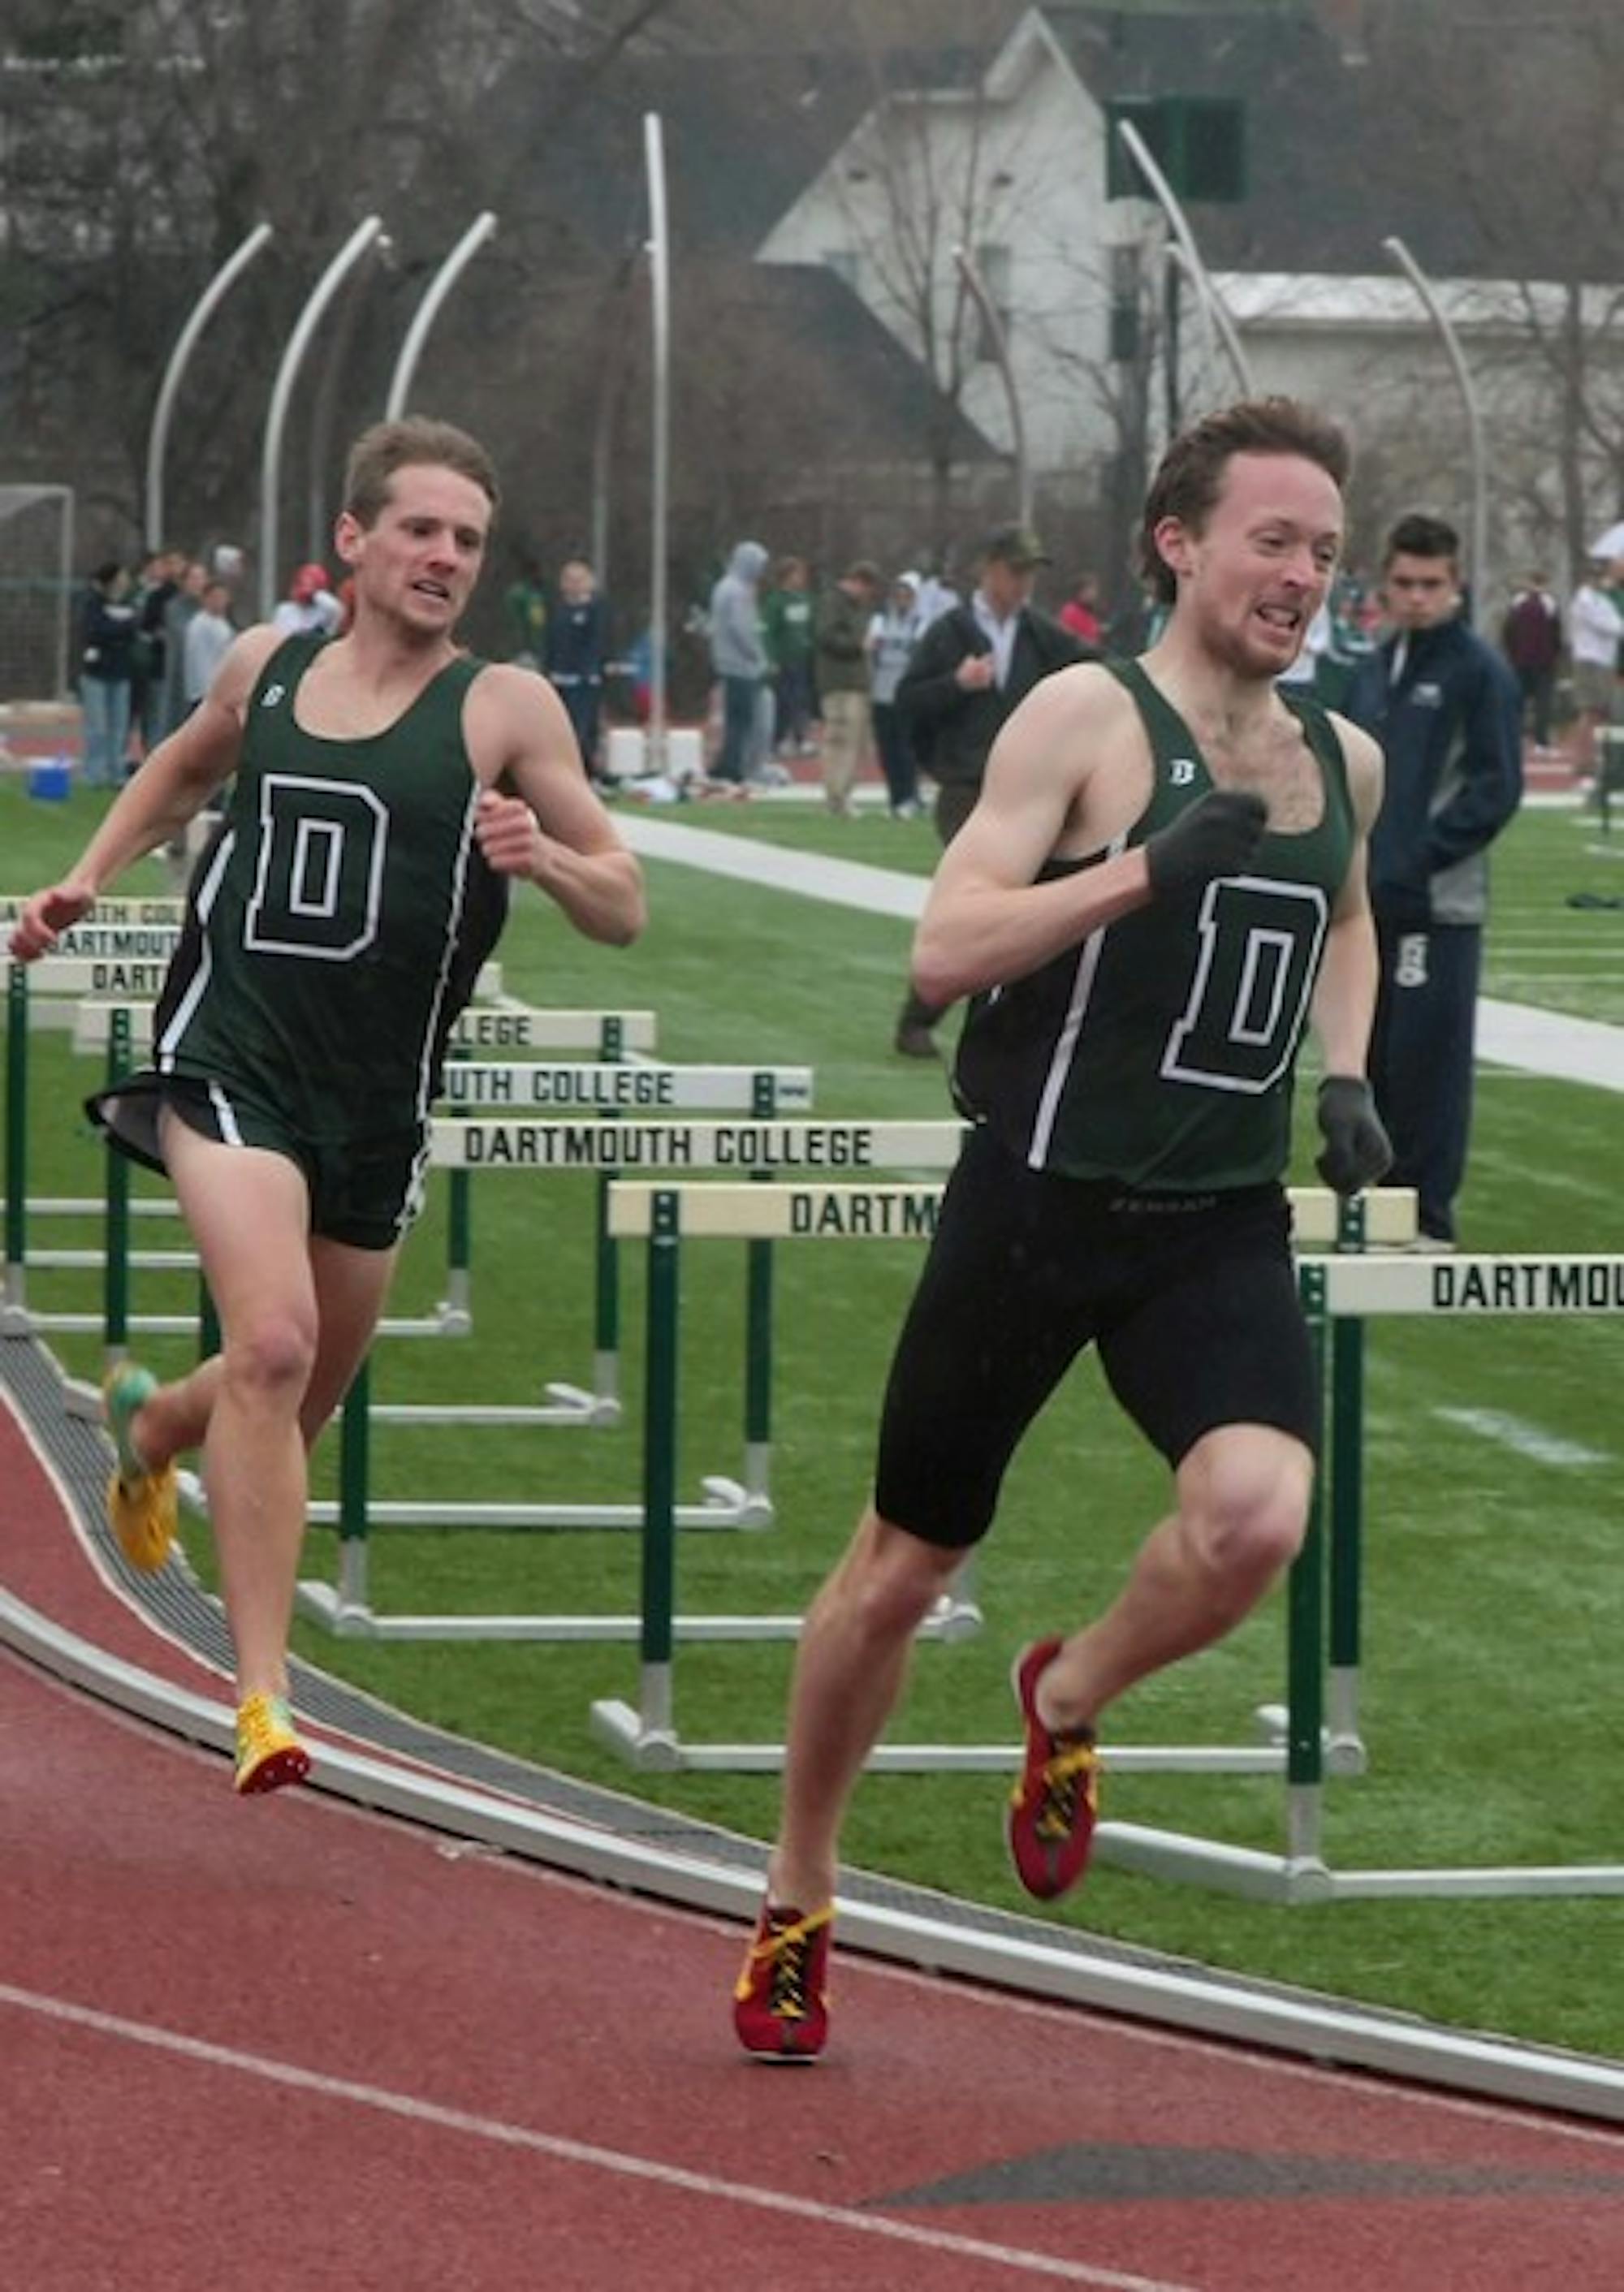 The Big Green men's track and field team finished fifth overall at the Heptagonal Championships over the weekend.